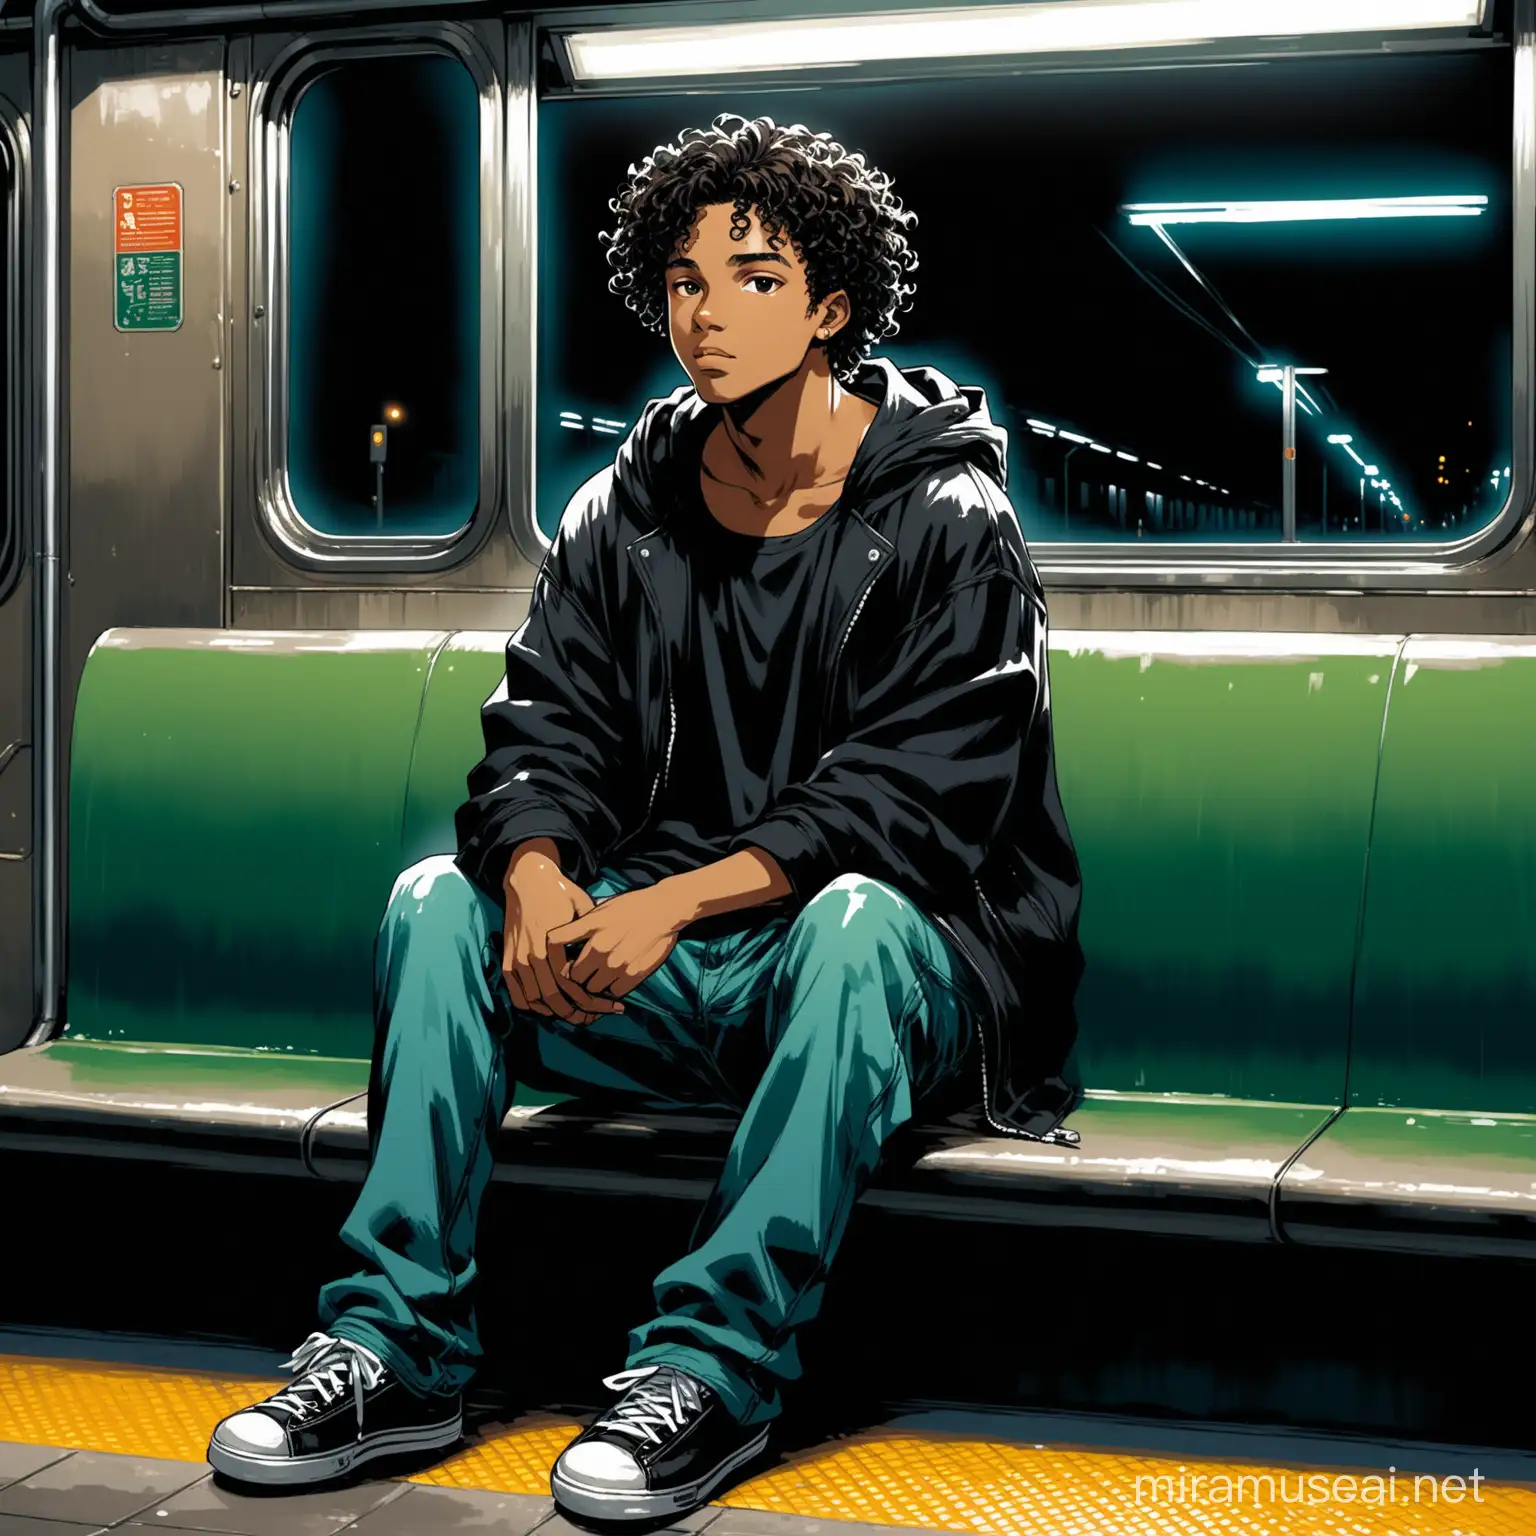 A very handsome African American/Mulatto semi-realism art-style man in almost semi-anime-like, teenage,  NOT BRIGHT LIGHT, DARK AS A NIGHT.Typical 1990s oversized clothes, a black tank top, and jacket with baggy jeans, brown eyes, curly black hair. Sitting alone on the poor-looking subway with graffitied, night, dim light almost dark green.